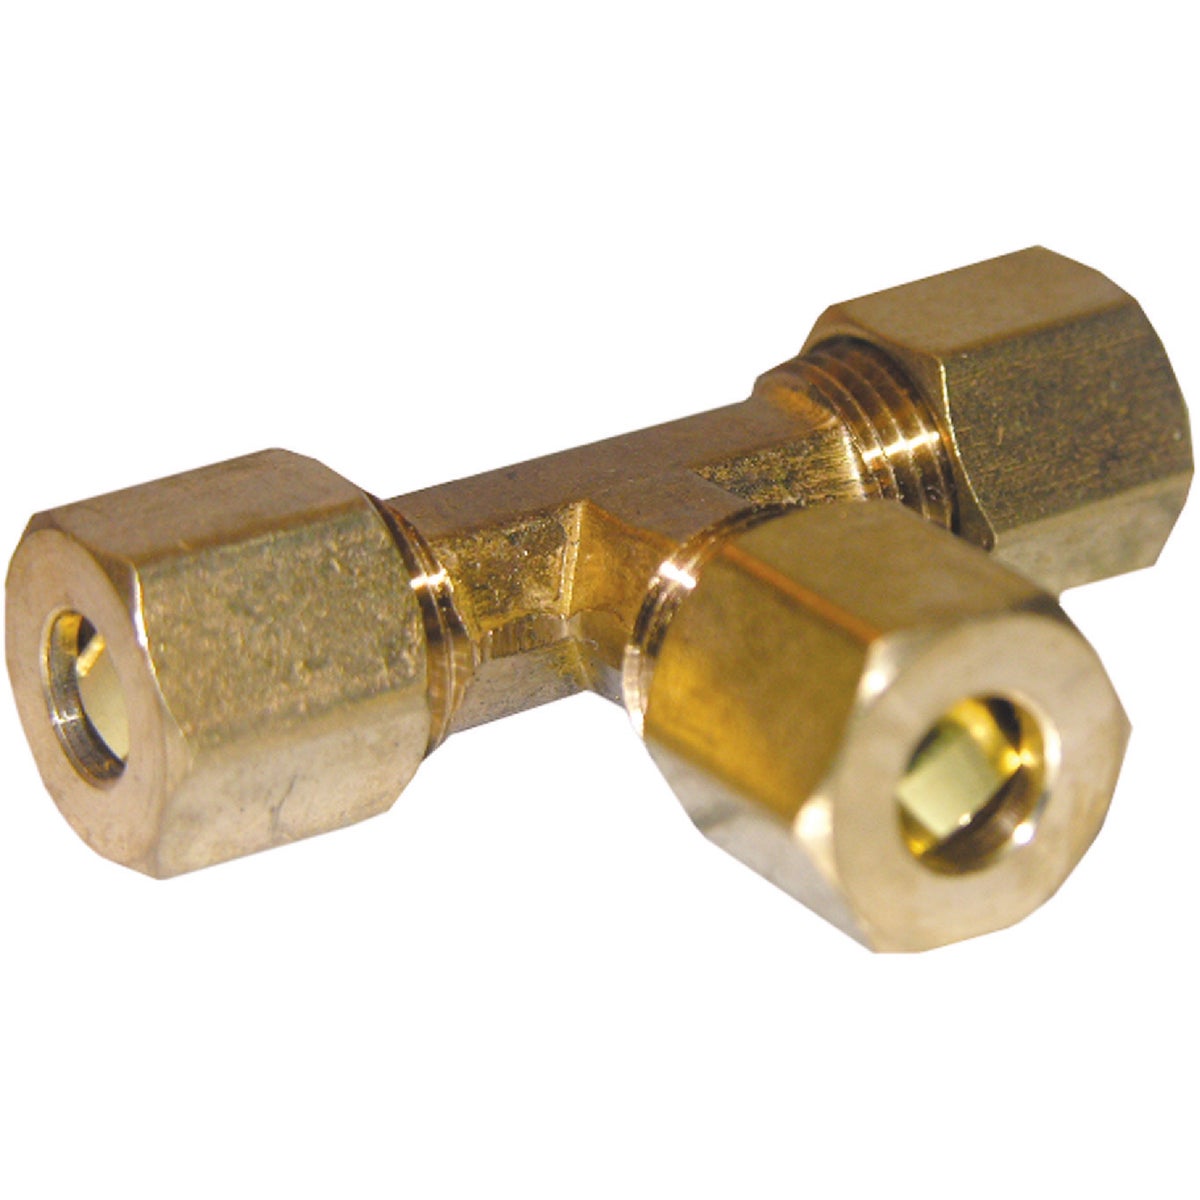 Lasco 1/4 In. x 1/4 In. x 1/4 In. Compression Brass Tee